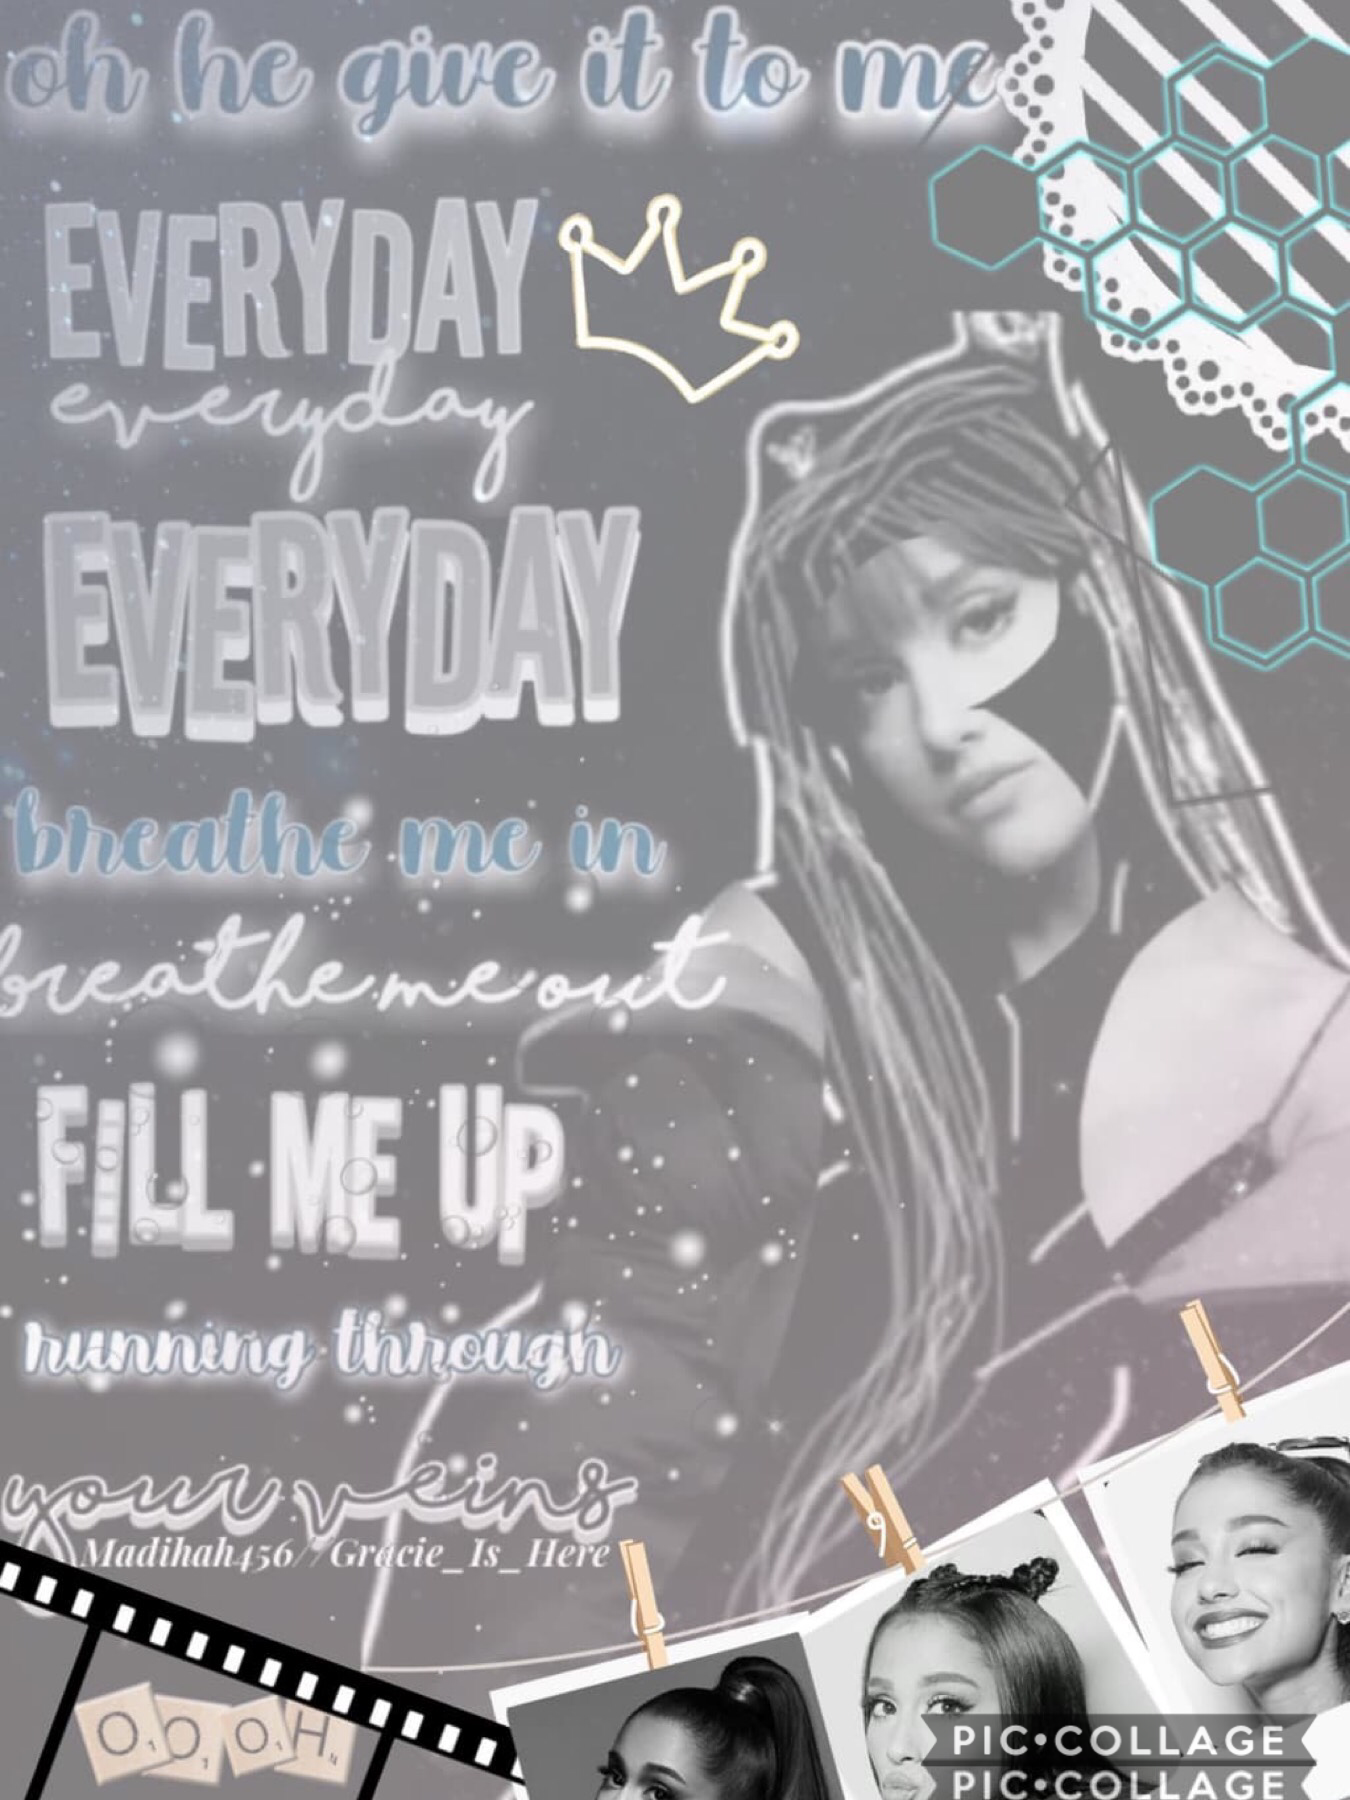 💕Collab with the amazing.. 💕
Madihah456! She did the stunning bg and pngs and I did the text! It was so fun collating with you bestie! It looks gorgeous! 💕💕🌸🌸